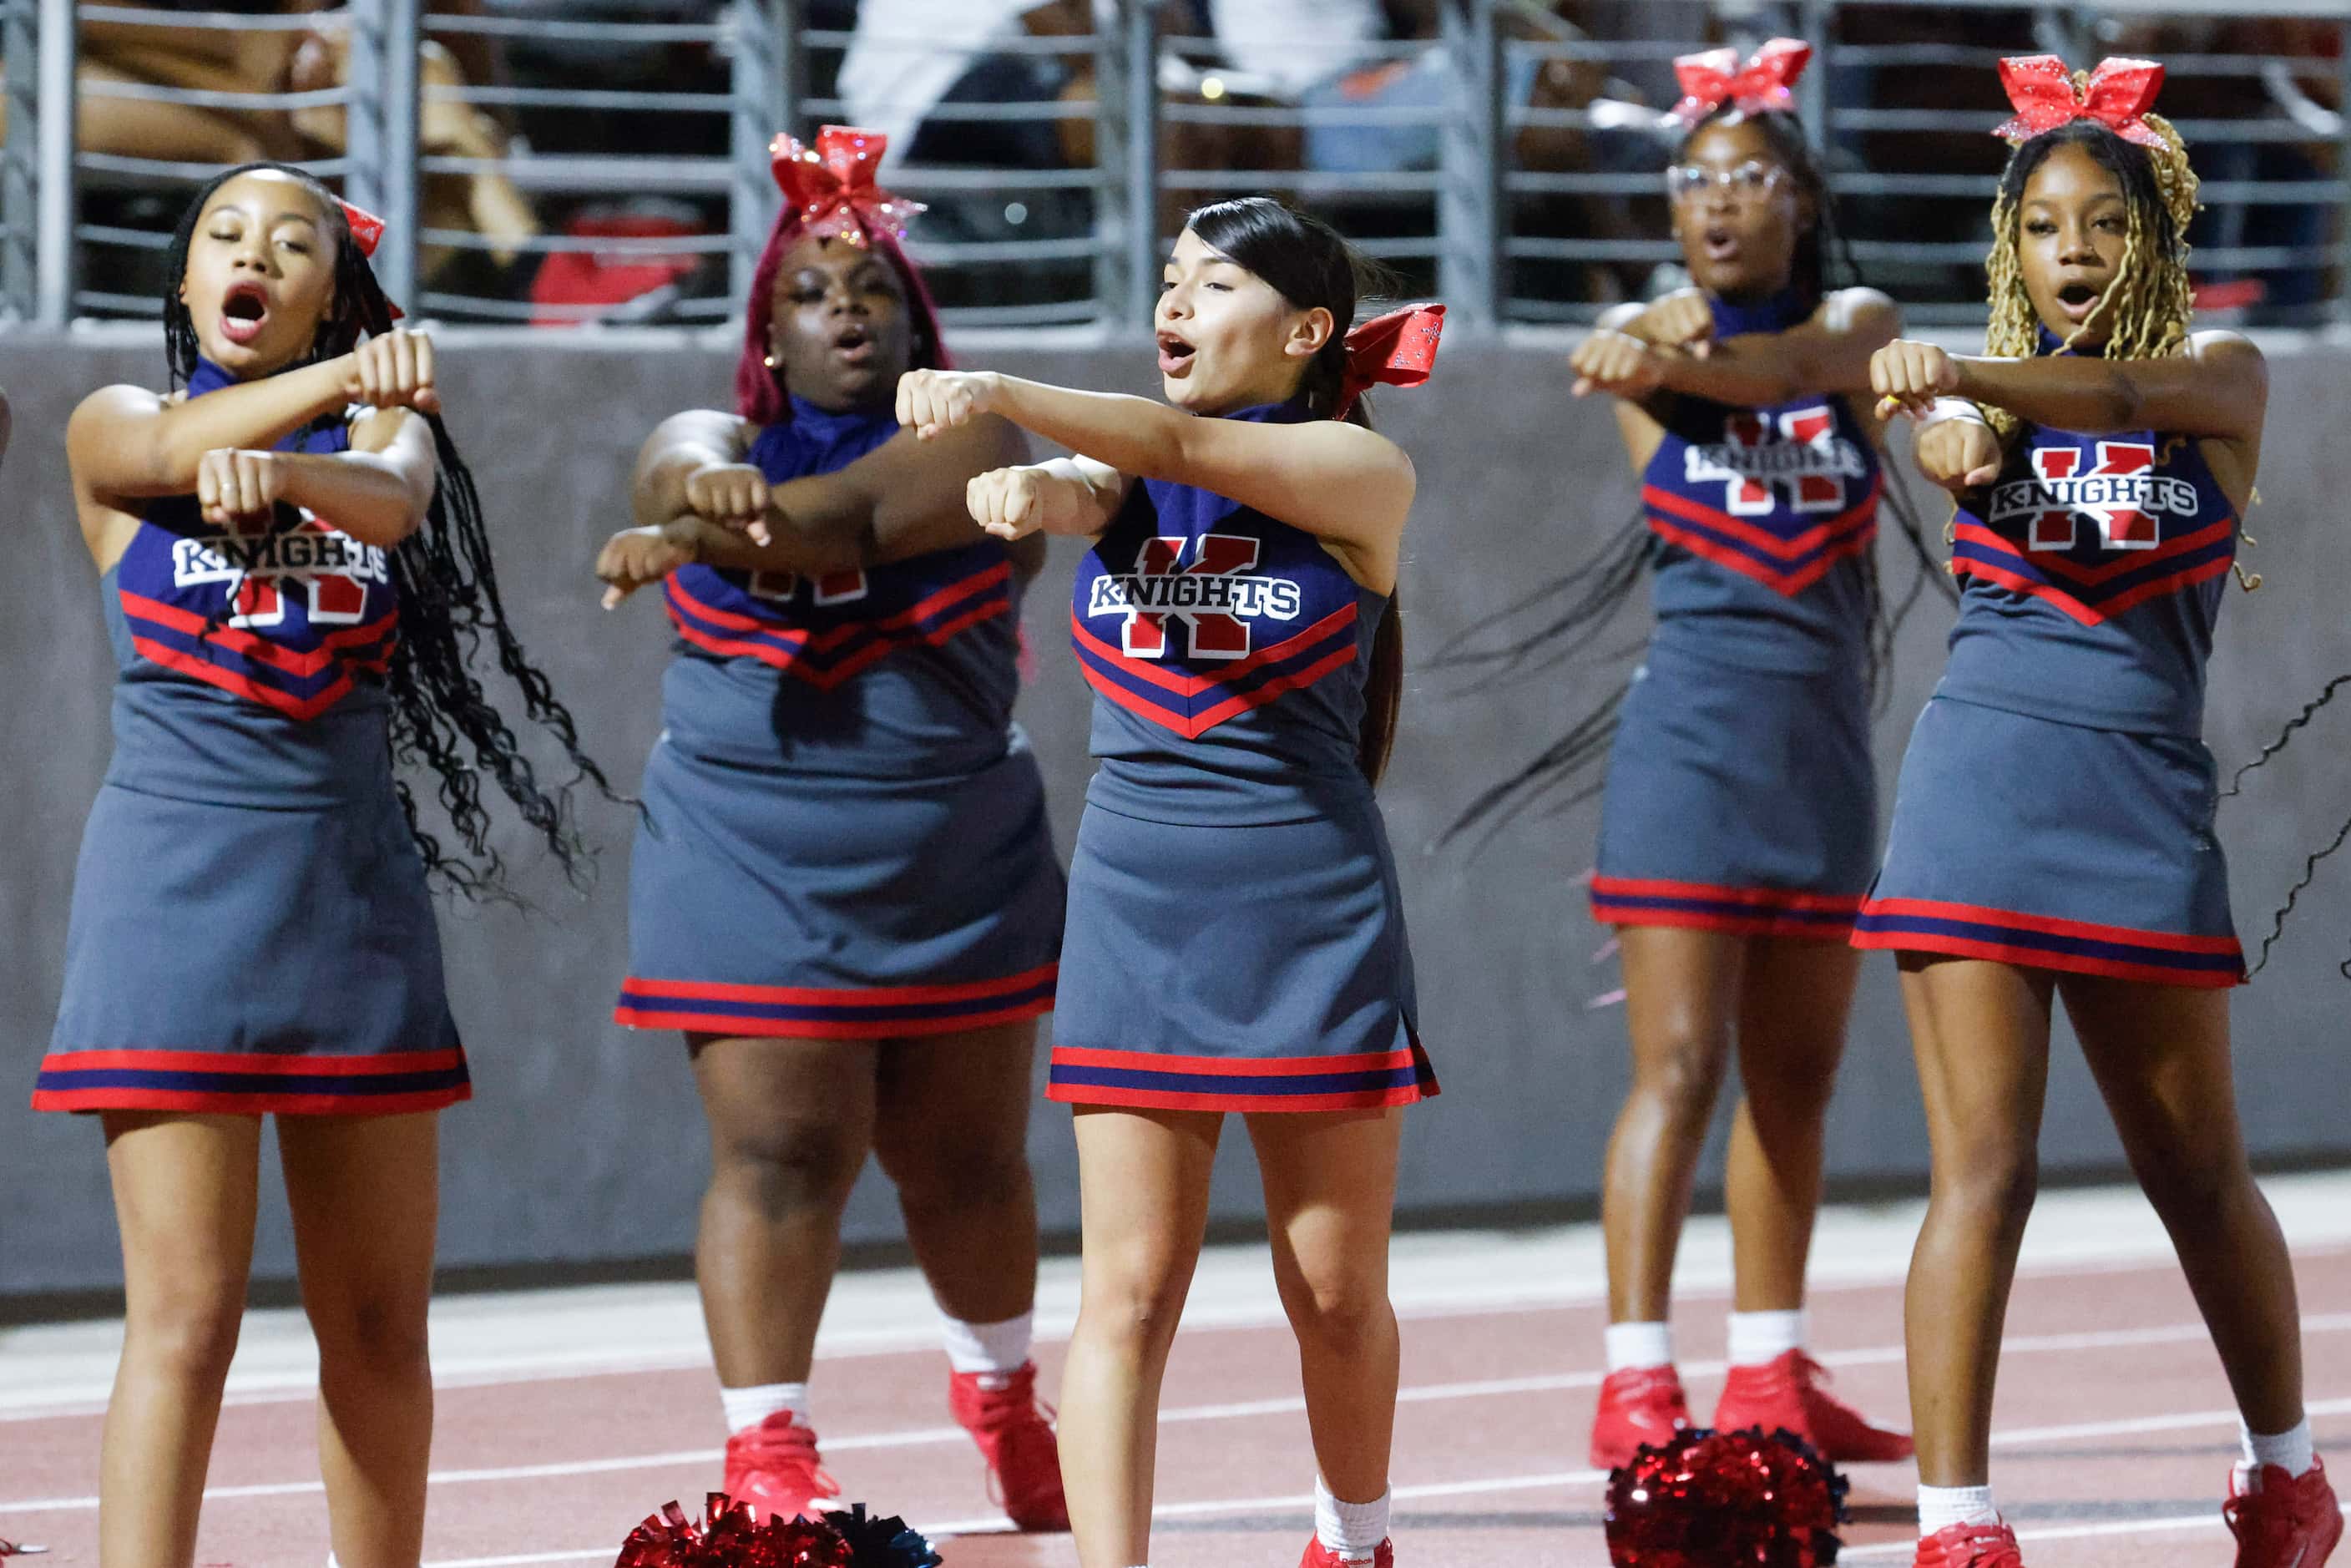 Kimball high’s cheer leaders perform during the second half of a football game against...